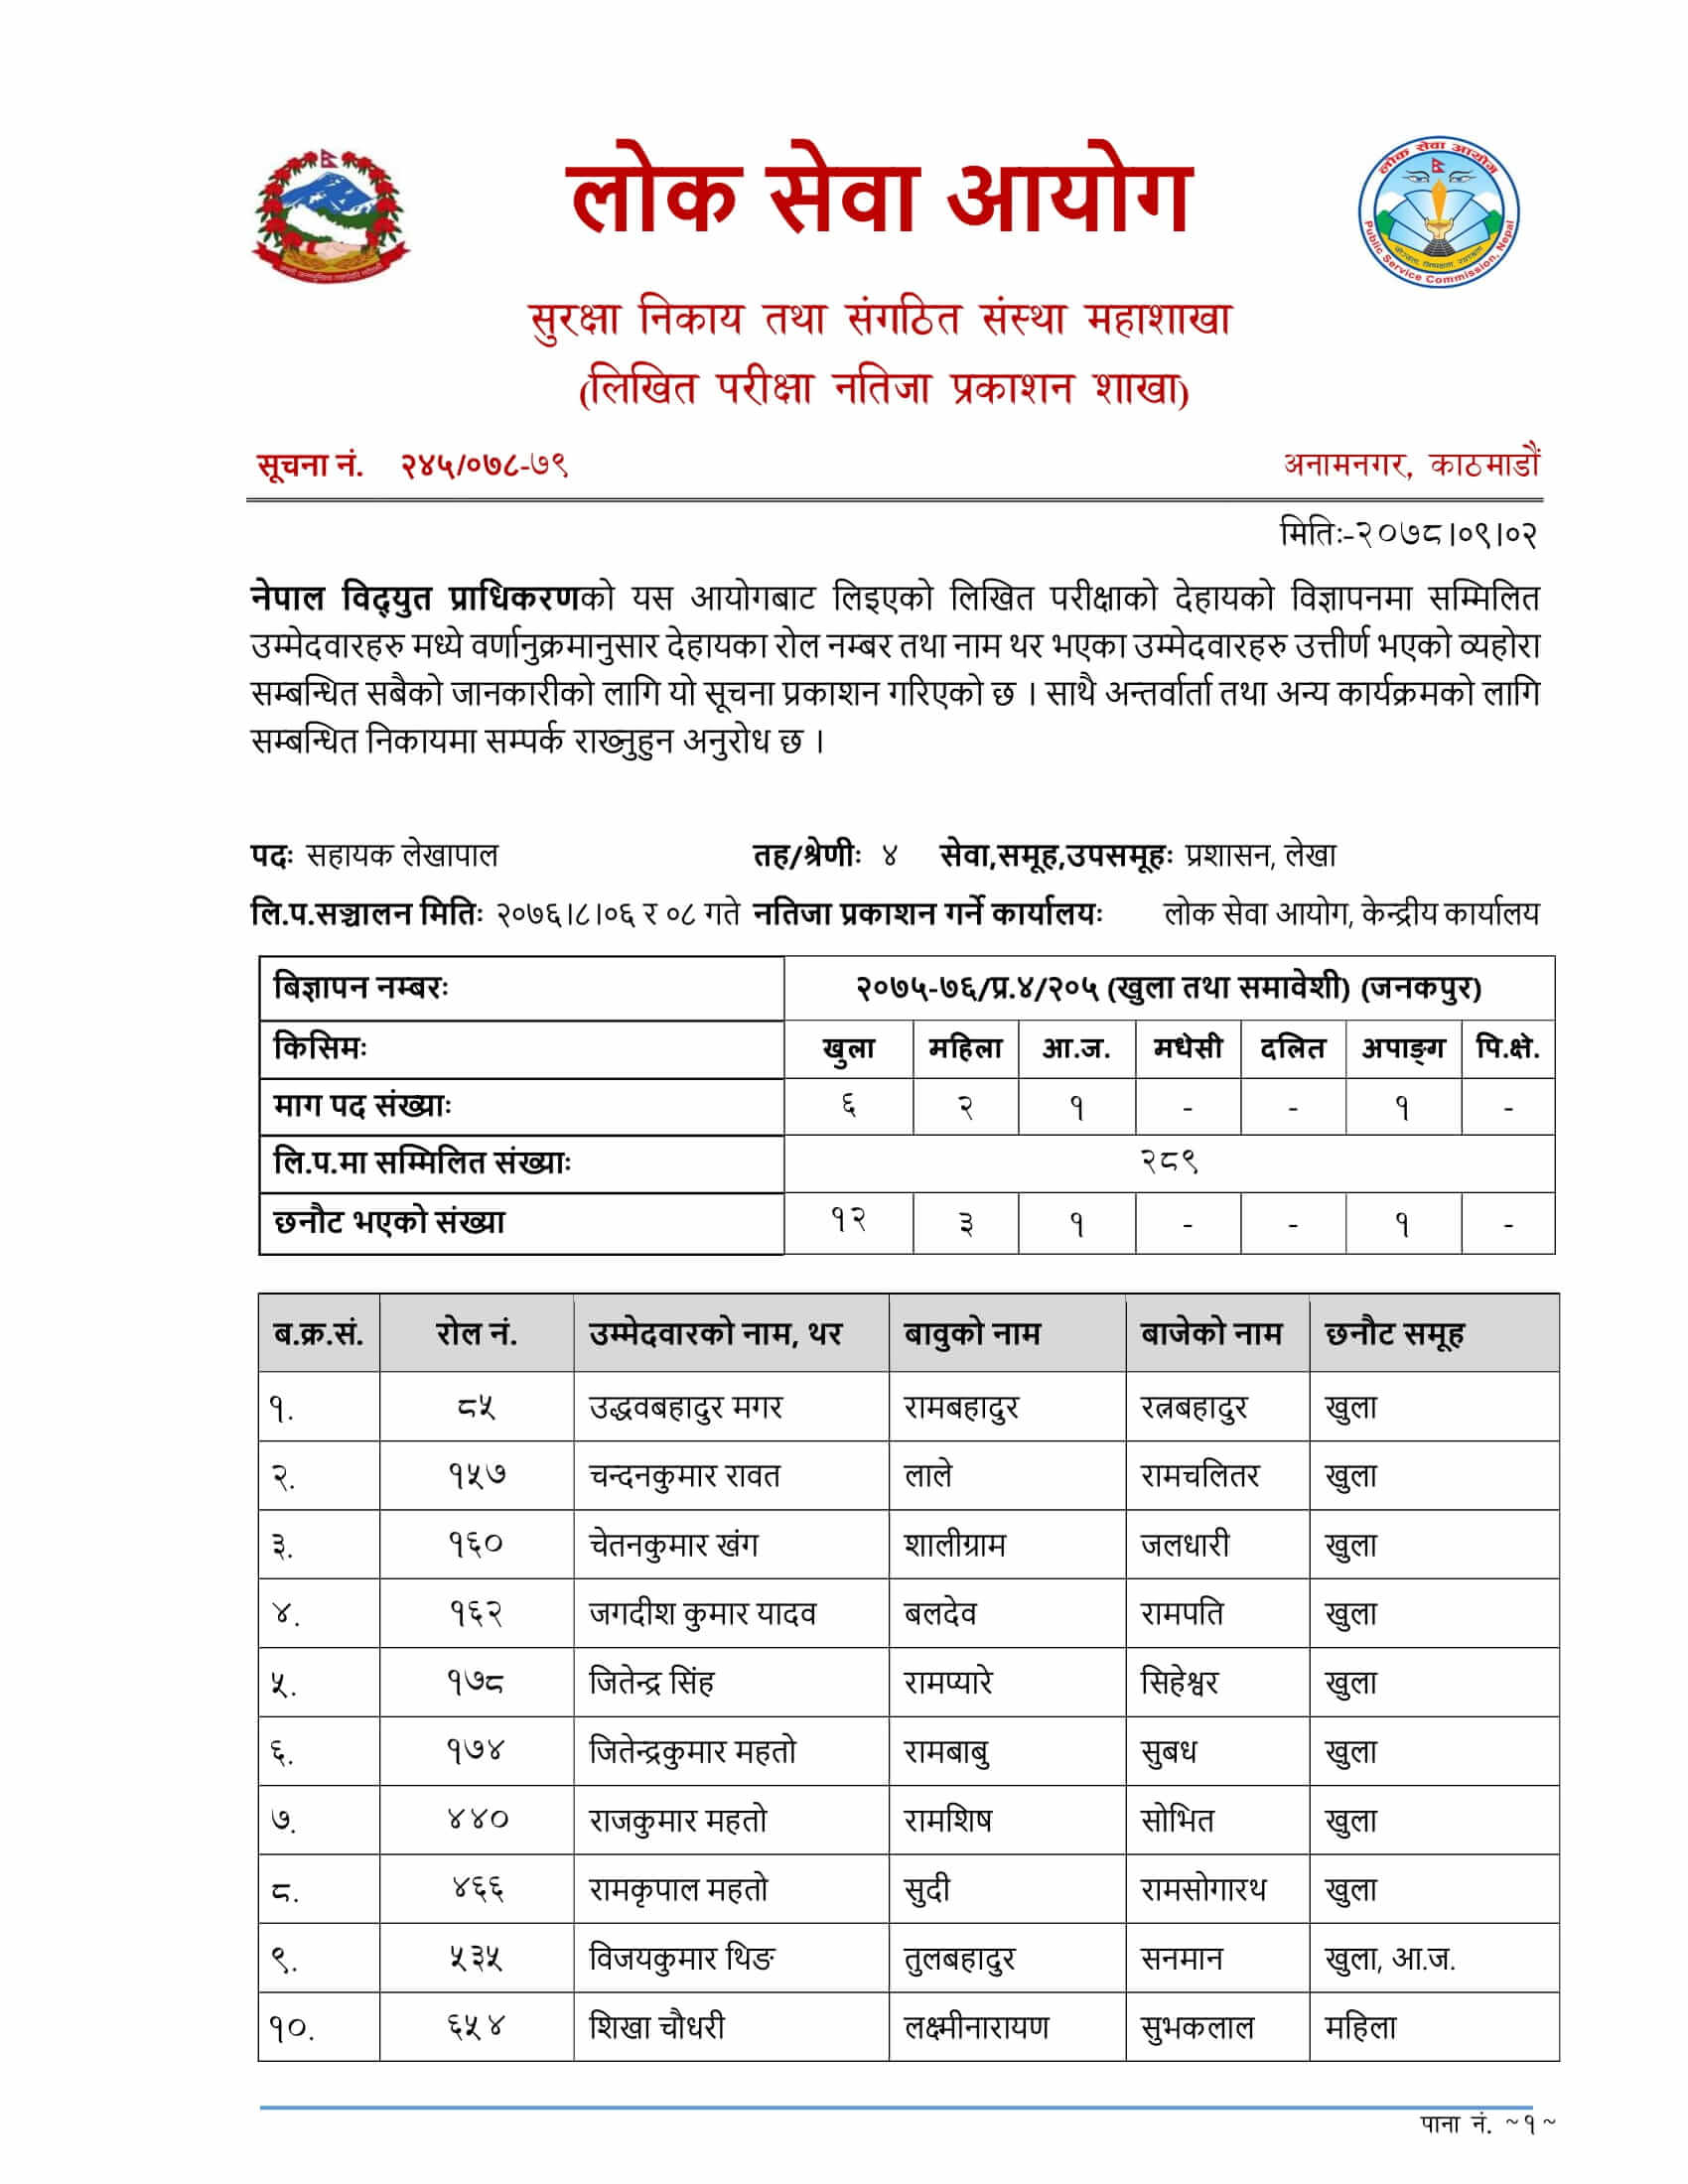 Nepal Electricity Authority Written Exam Result